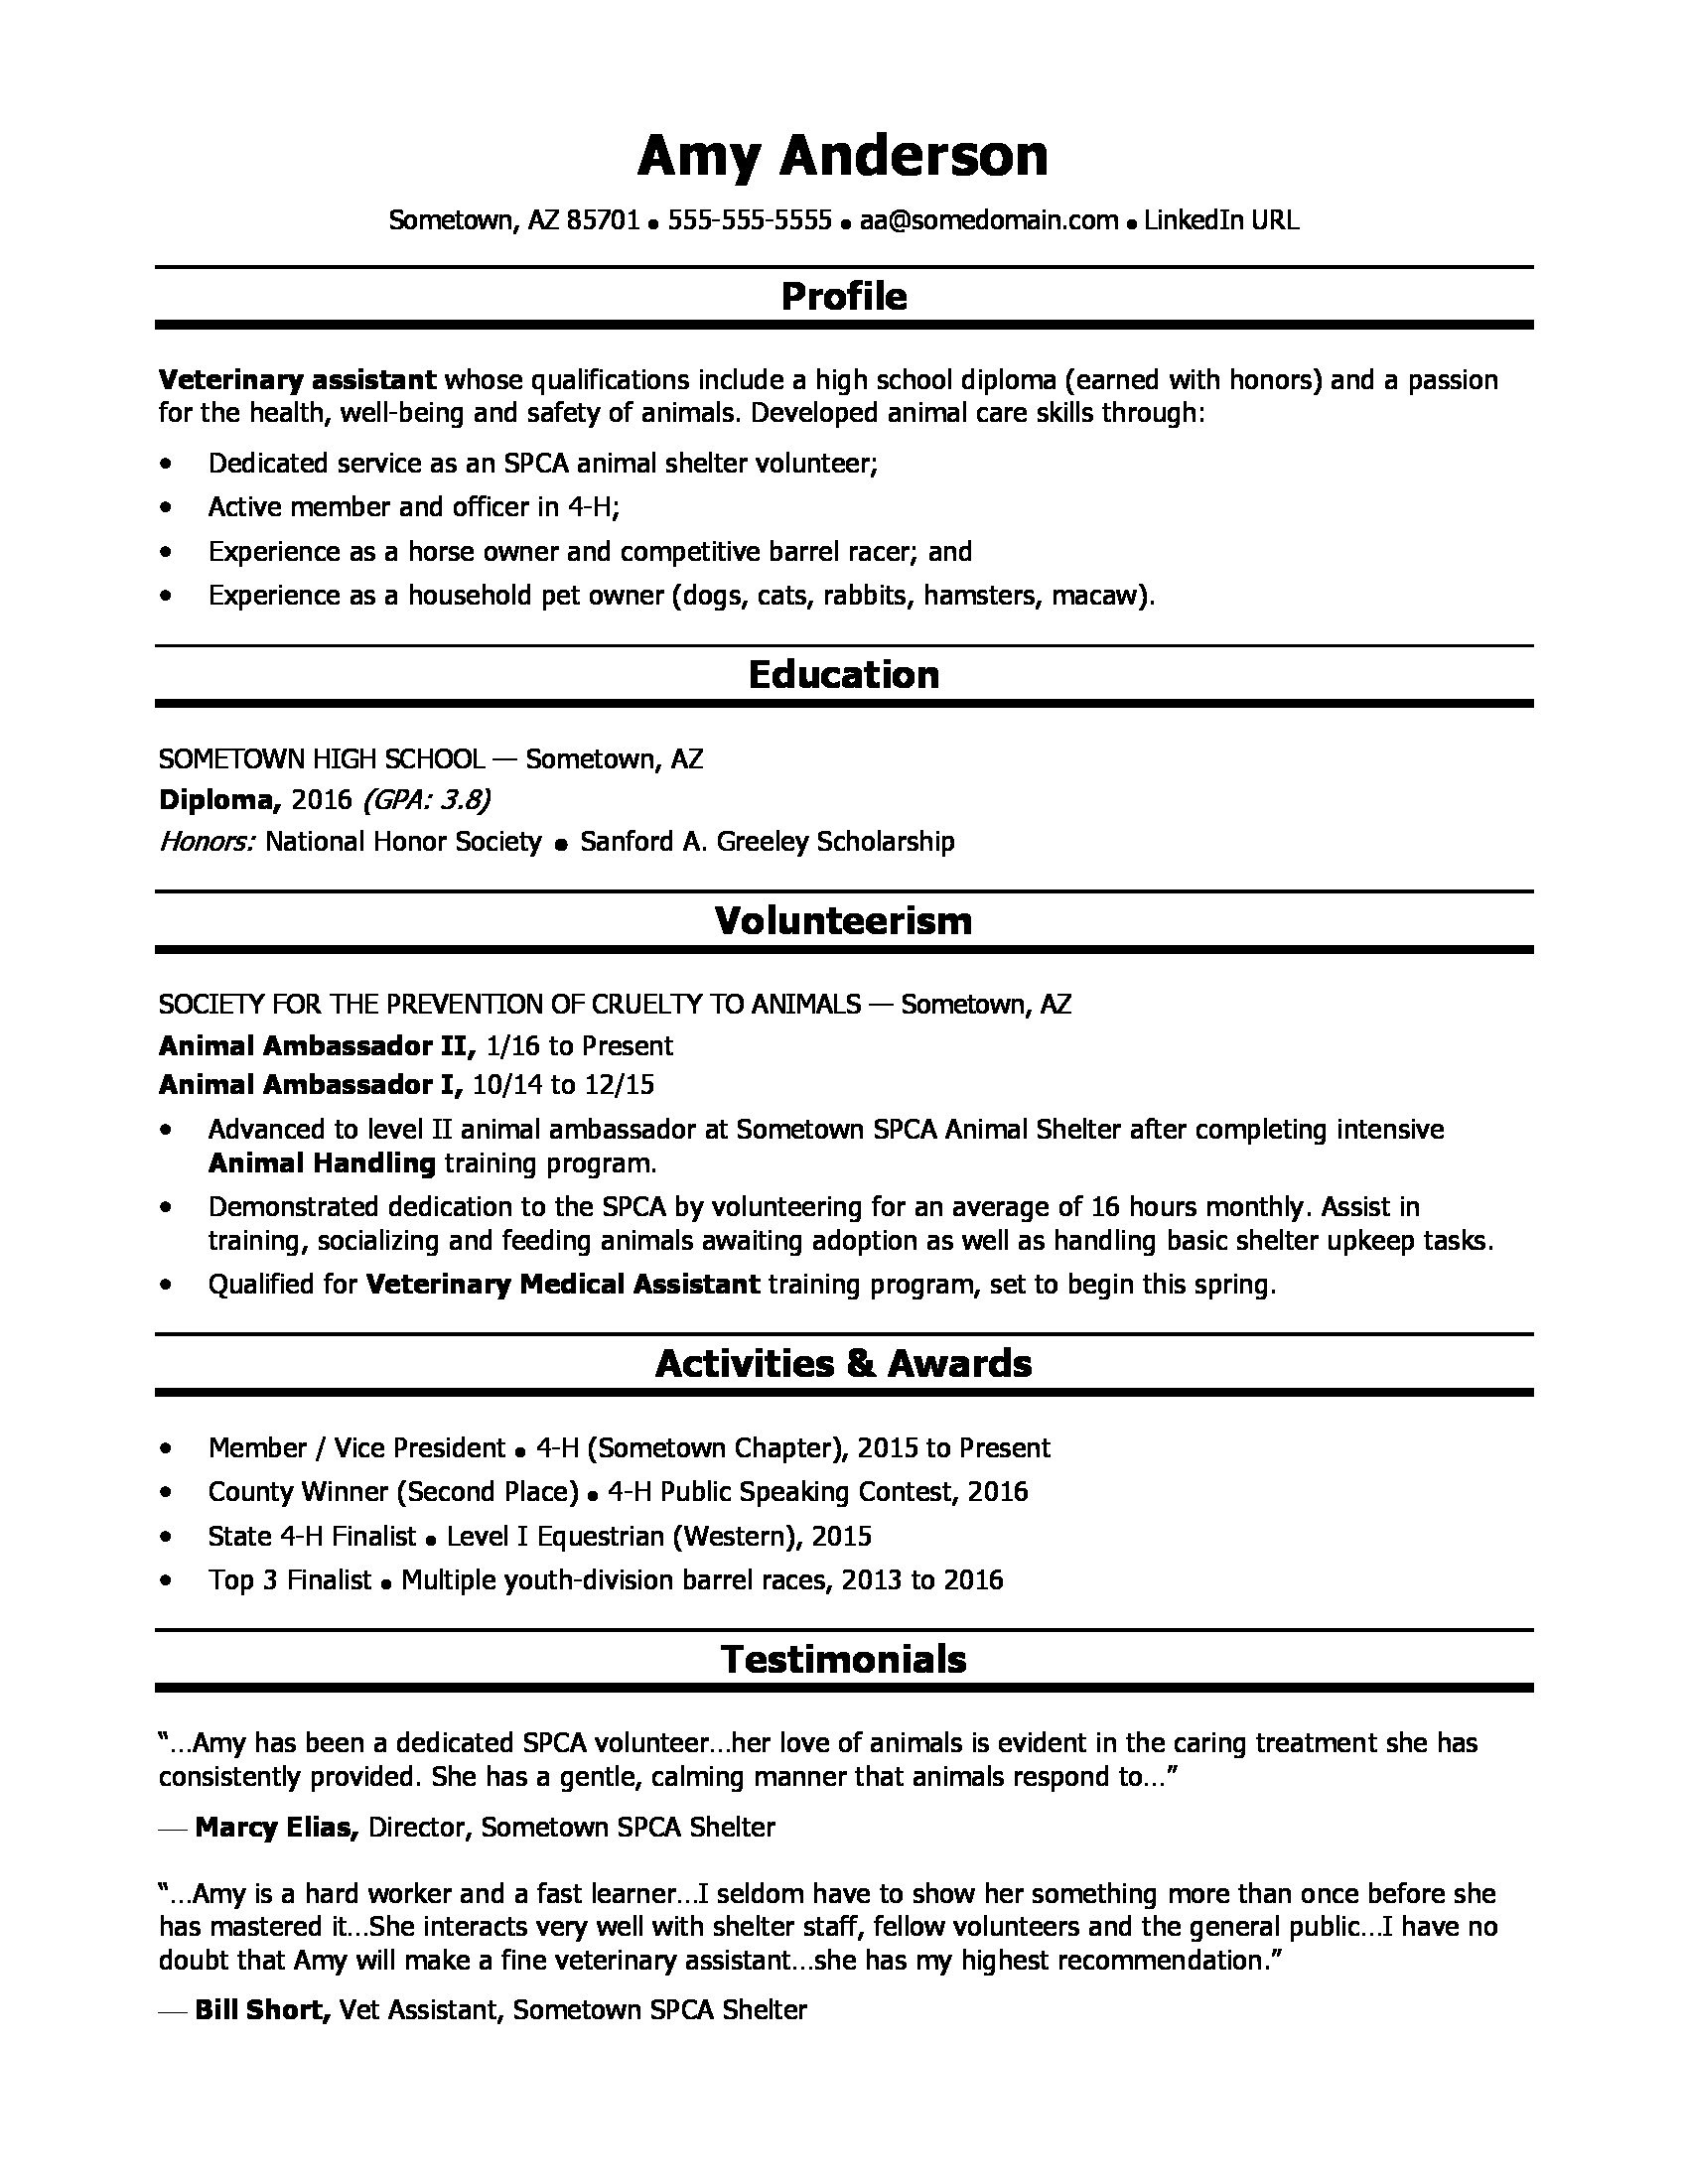 Resume Template for Recent High School Graduate High School Grad Resume Sample Monster.com